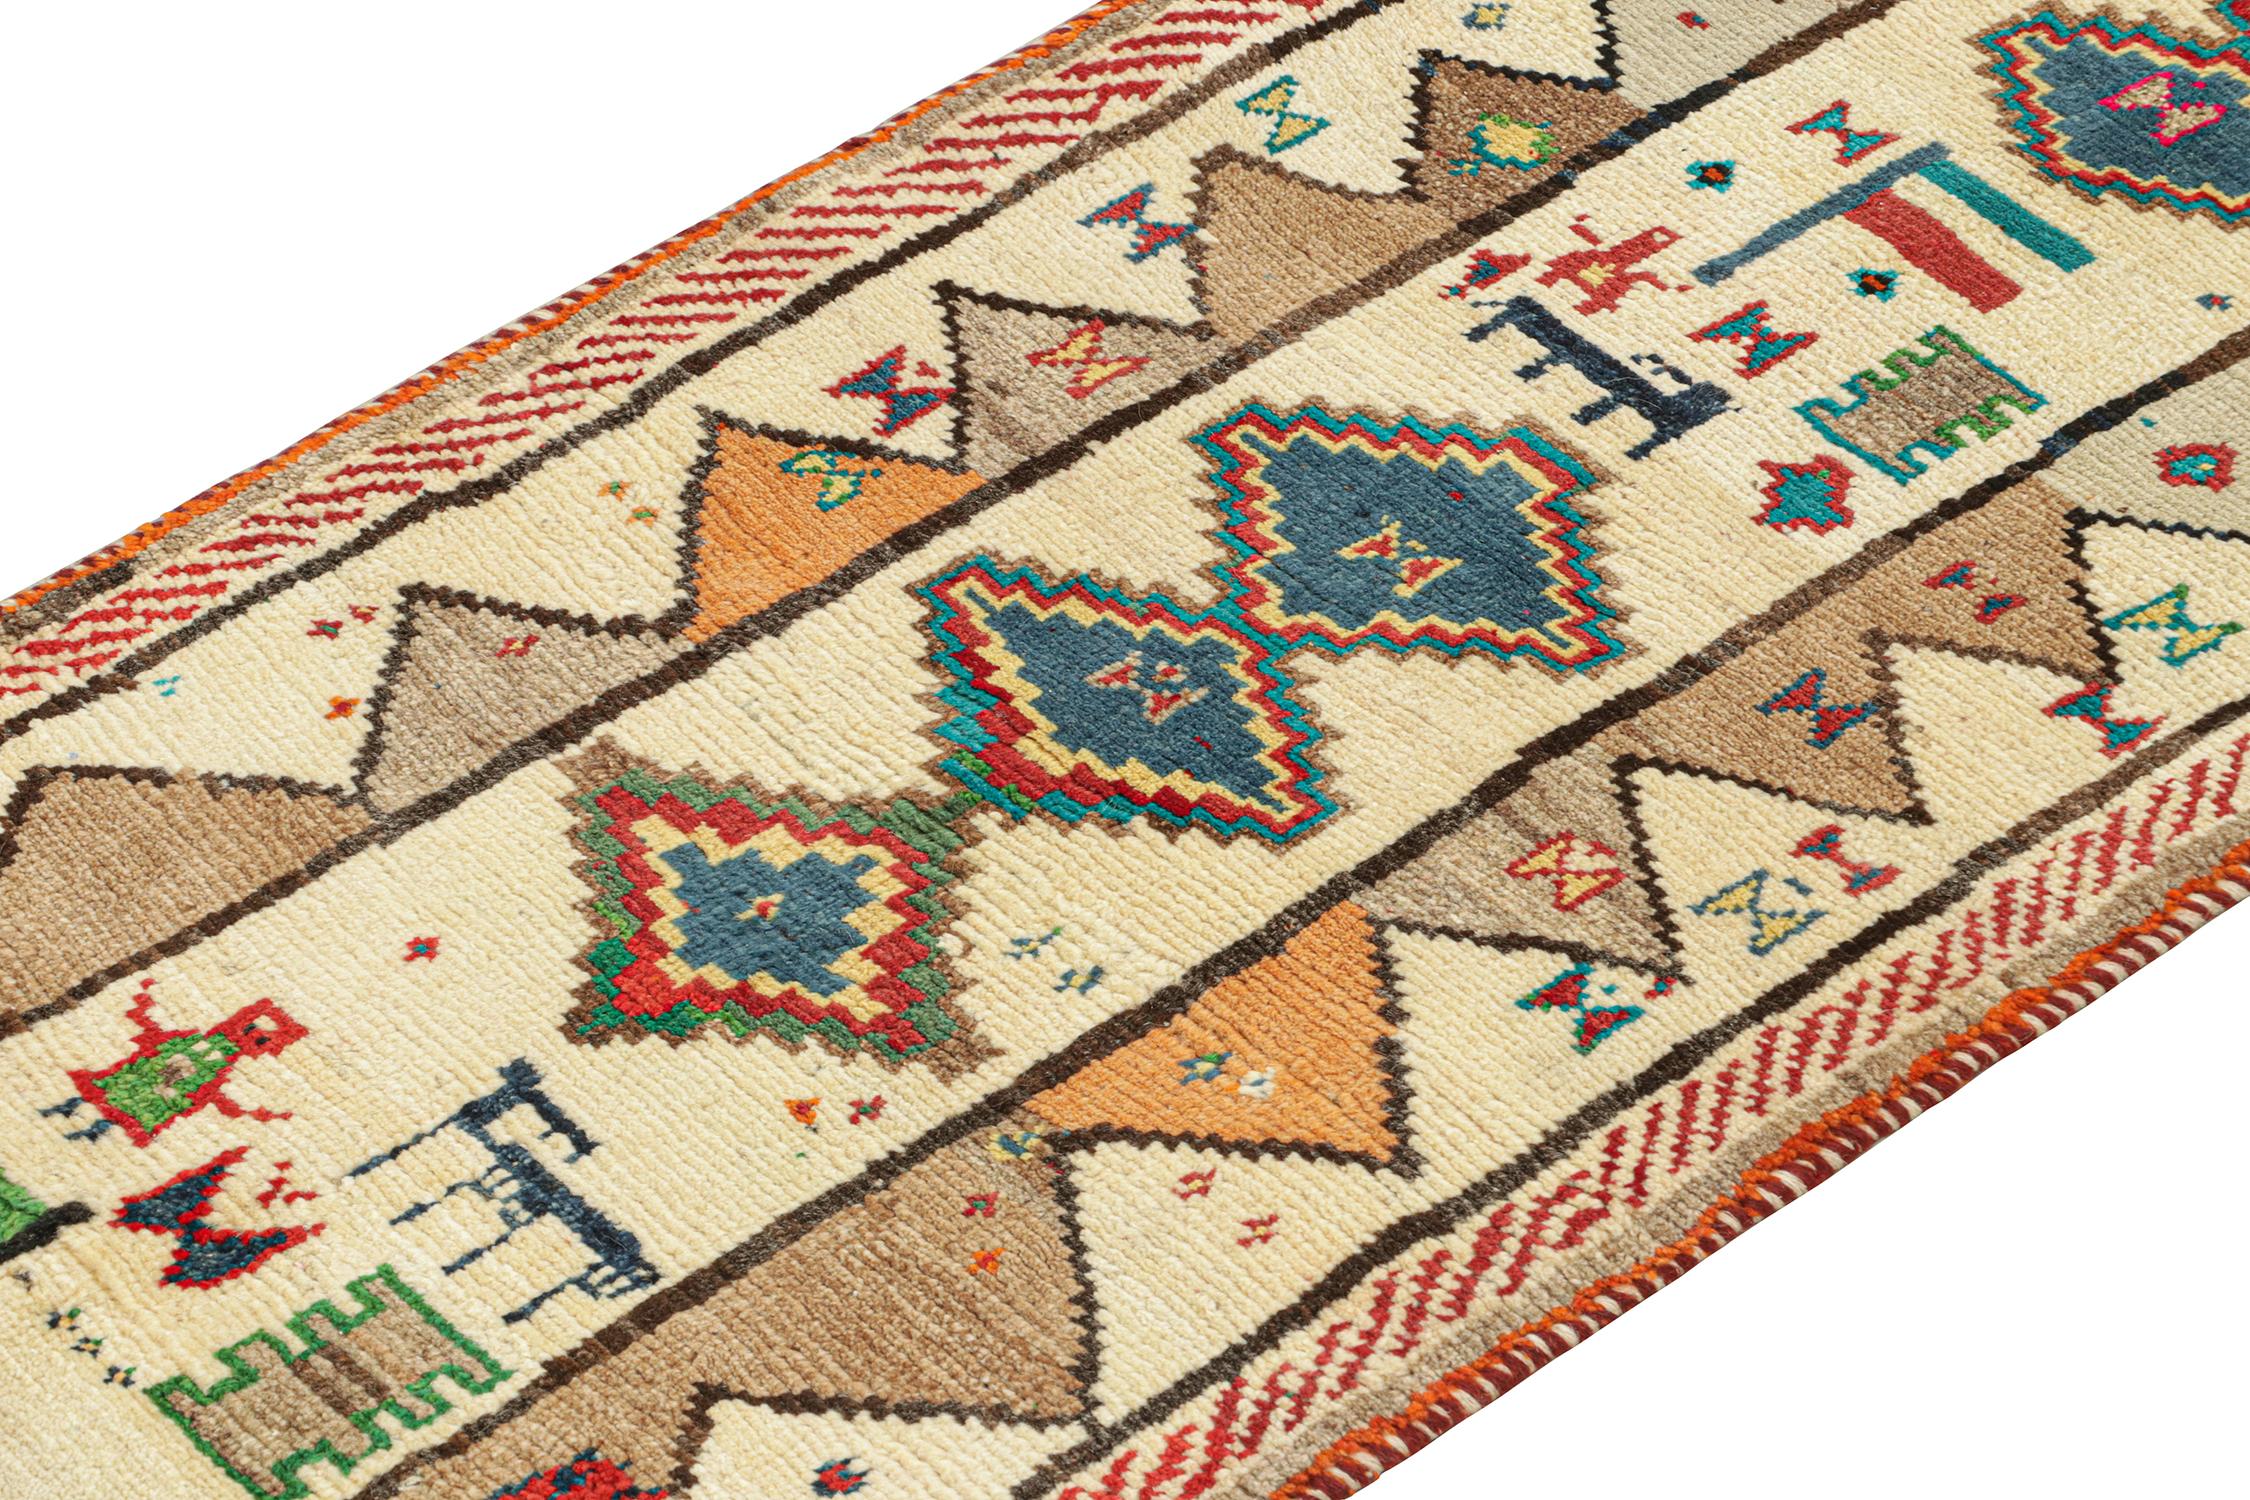 Vintage Persian Tribal runner in Beige with Geometric Patterns by Rug & Kilim In Good Condition For Sale In Long Island City, NY